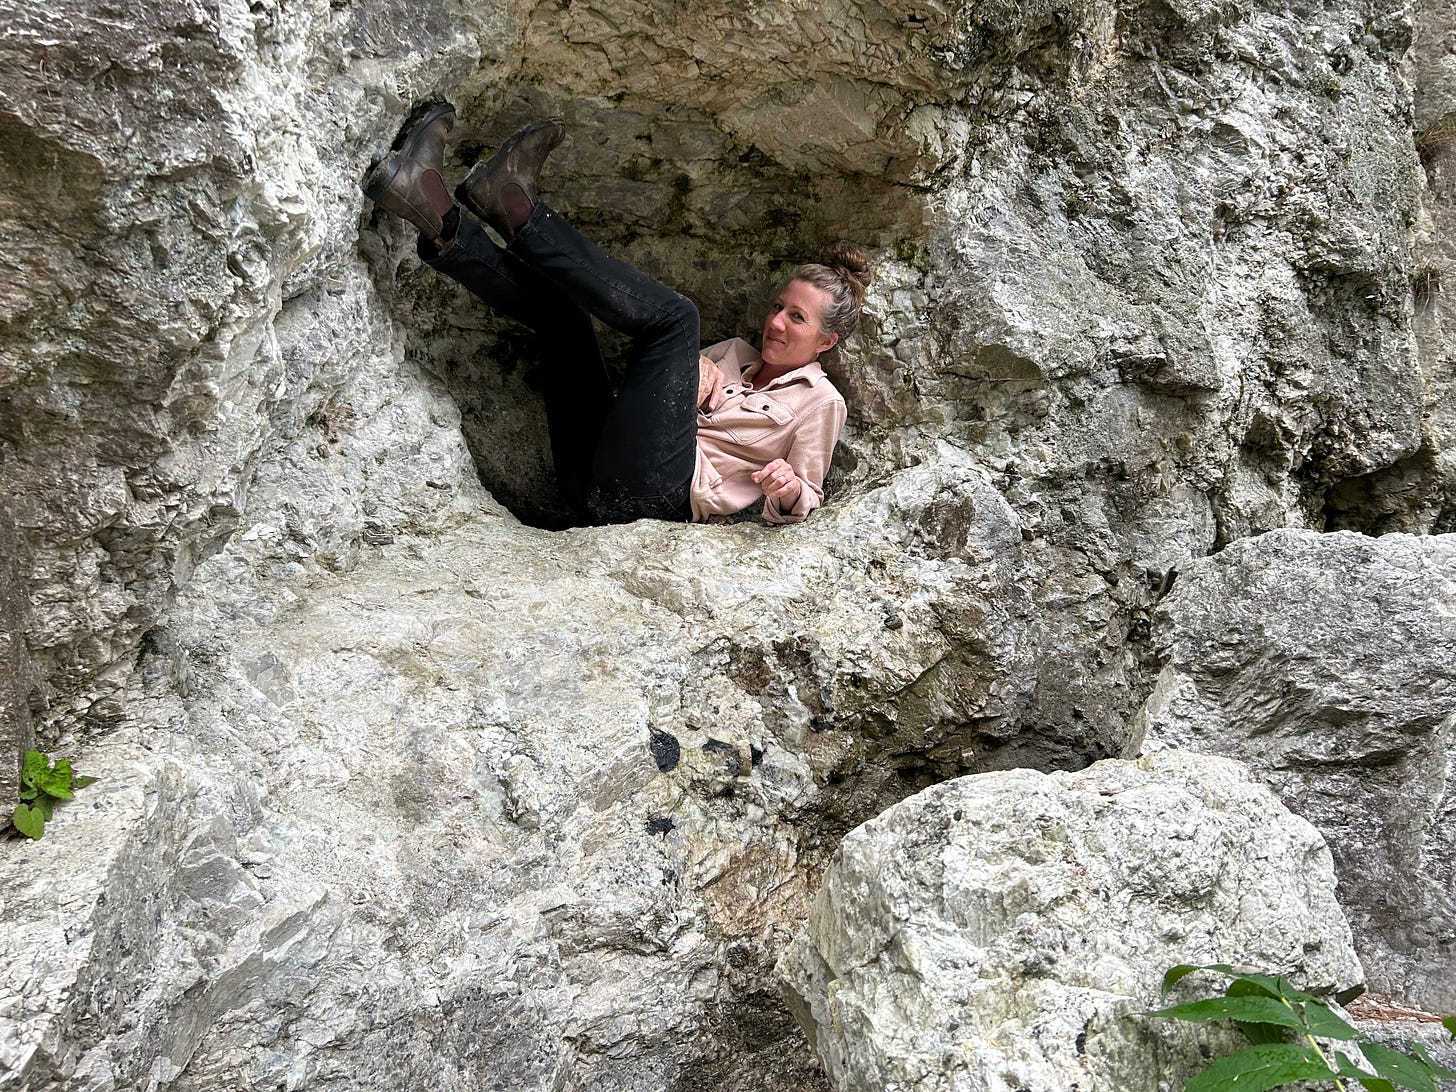 Photo of Michele in cavern in the quarry walls, smiling with messy bun, pink long-sleeve shirt, dirty black jeans, and boots.